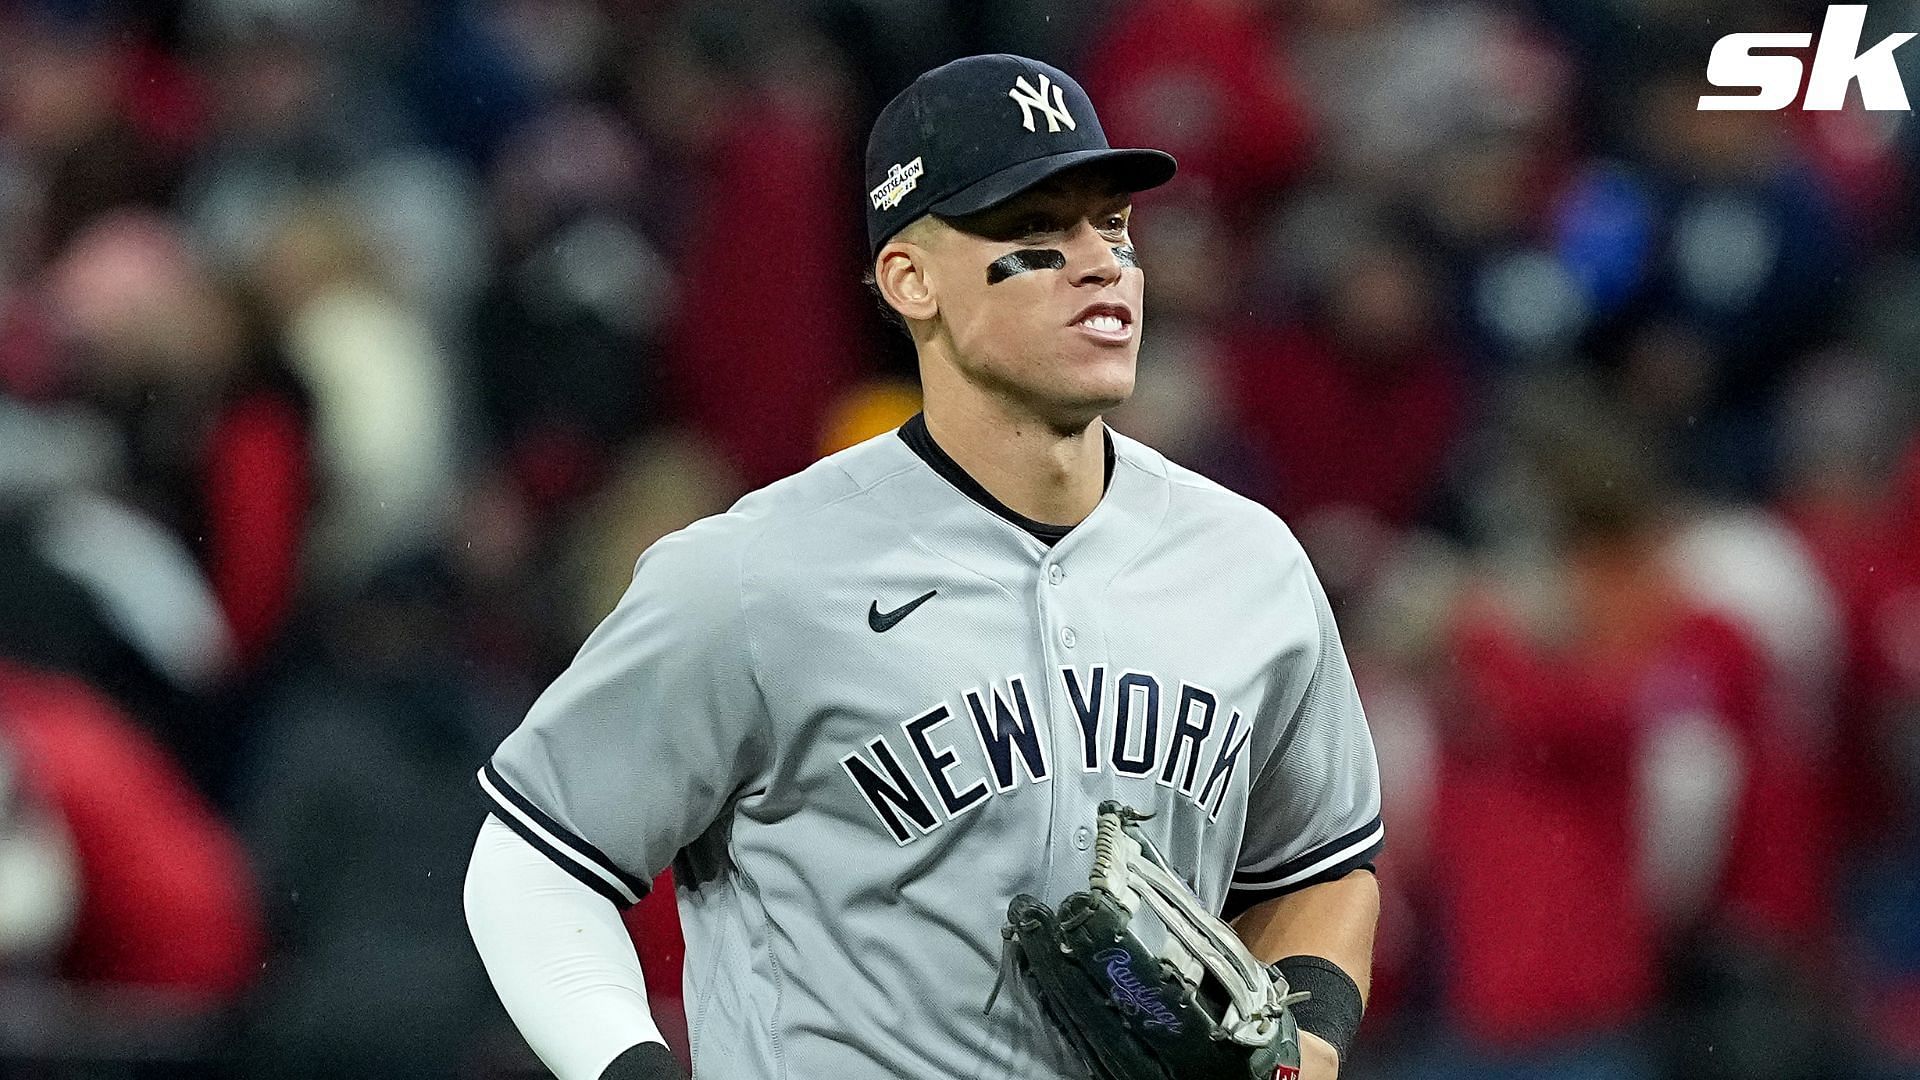 Yankees star Aaron Judge opened up on why he stays back for young fans who want his autograph